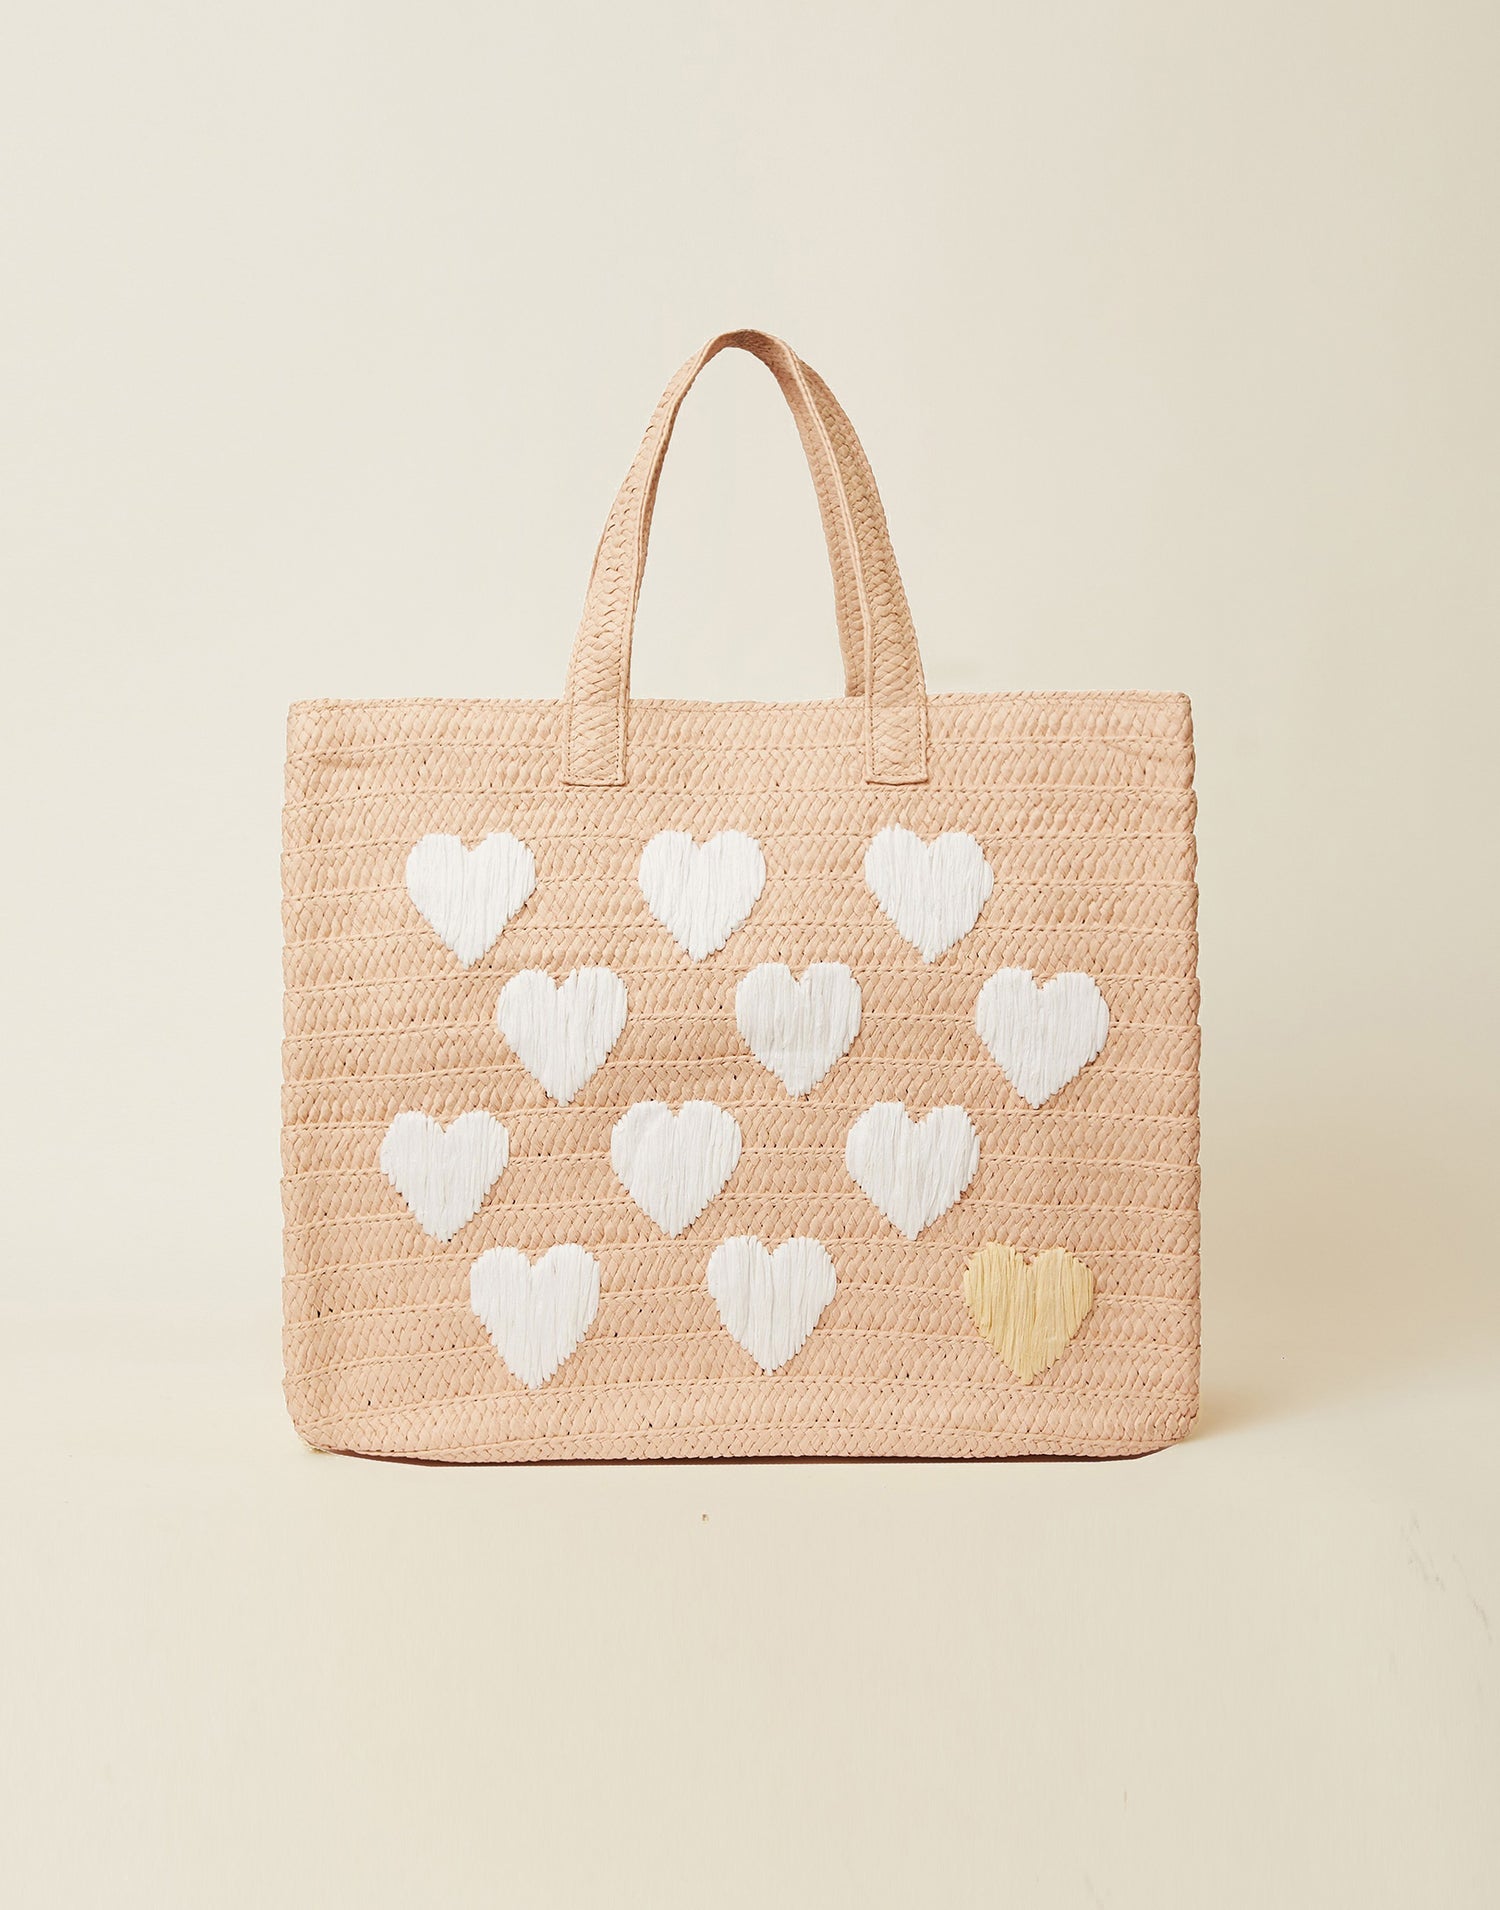 Be Mine Tote by BTB Los Angeles in Dusty/White - Product View